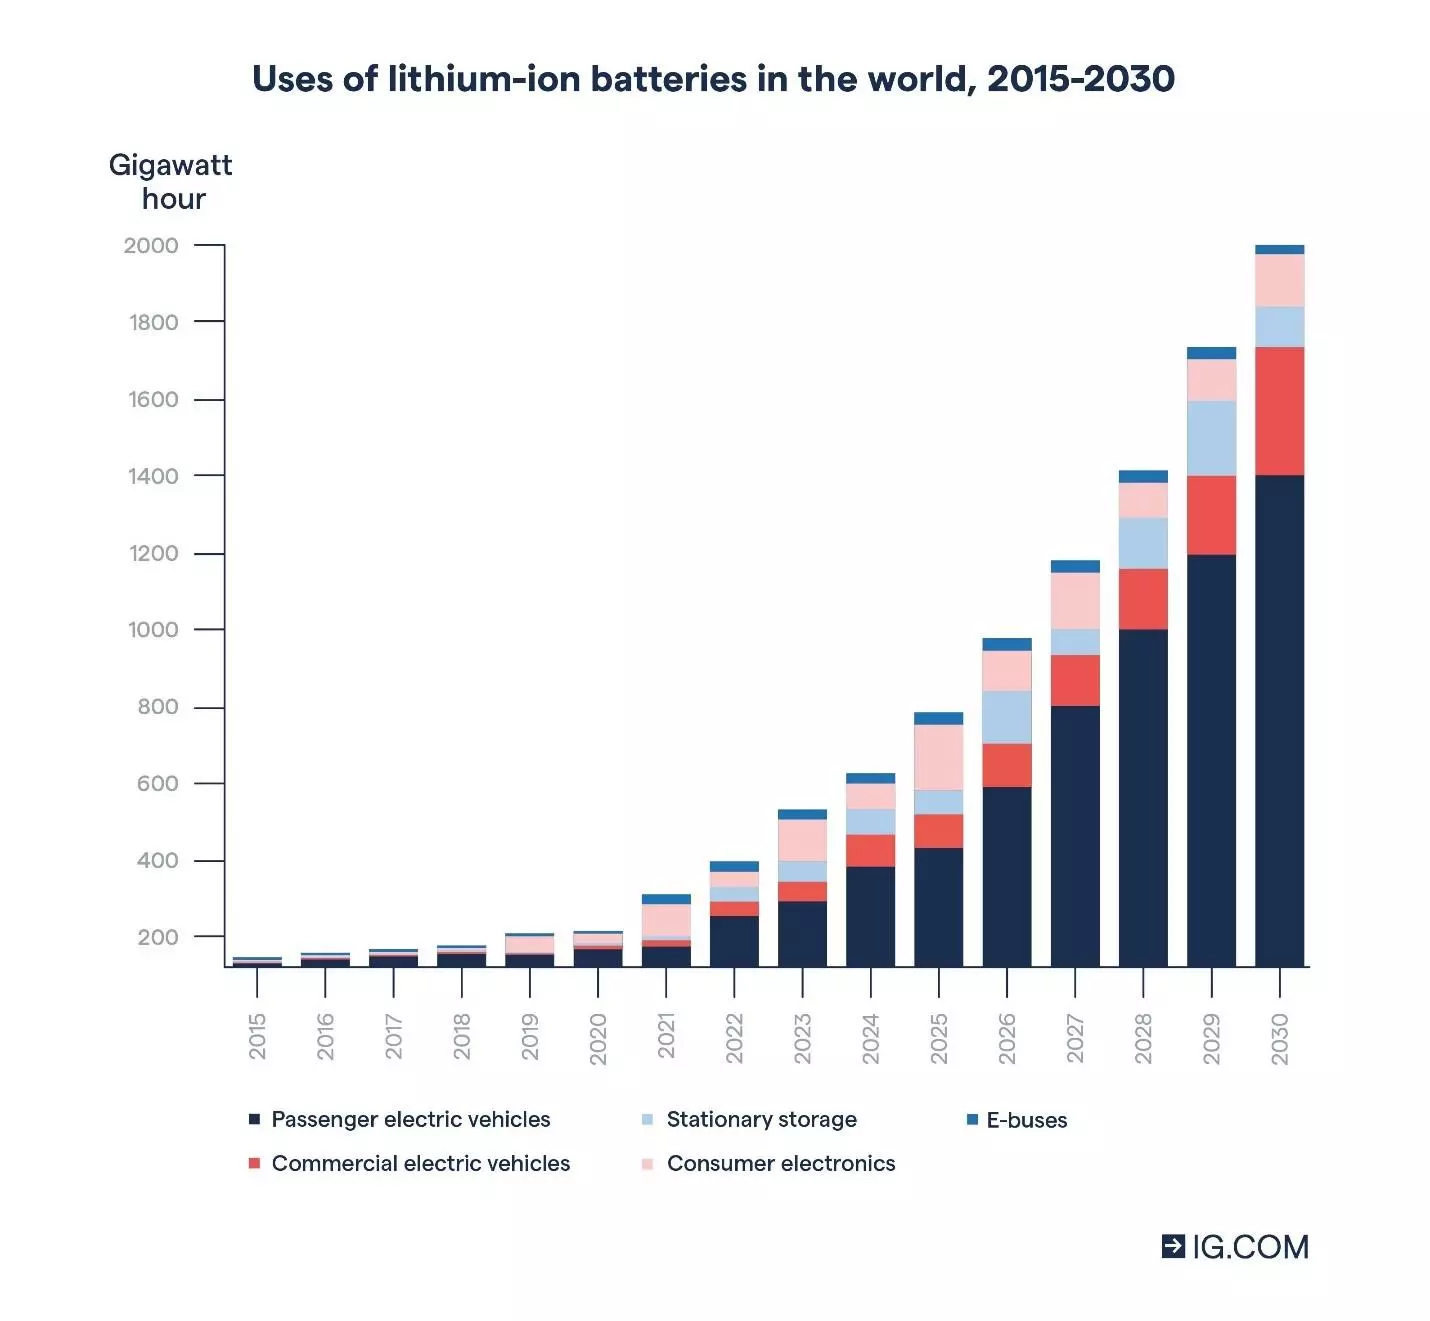 Uses of lithium-ion batteries in the world 2015 - 2030